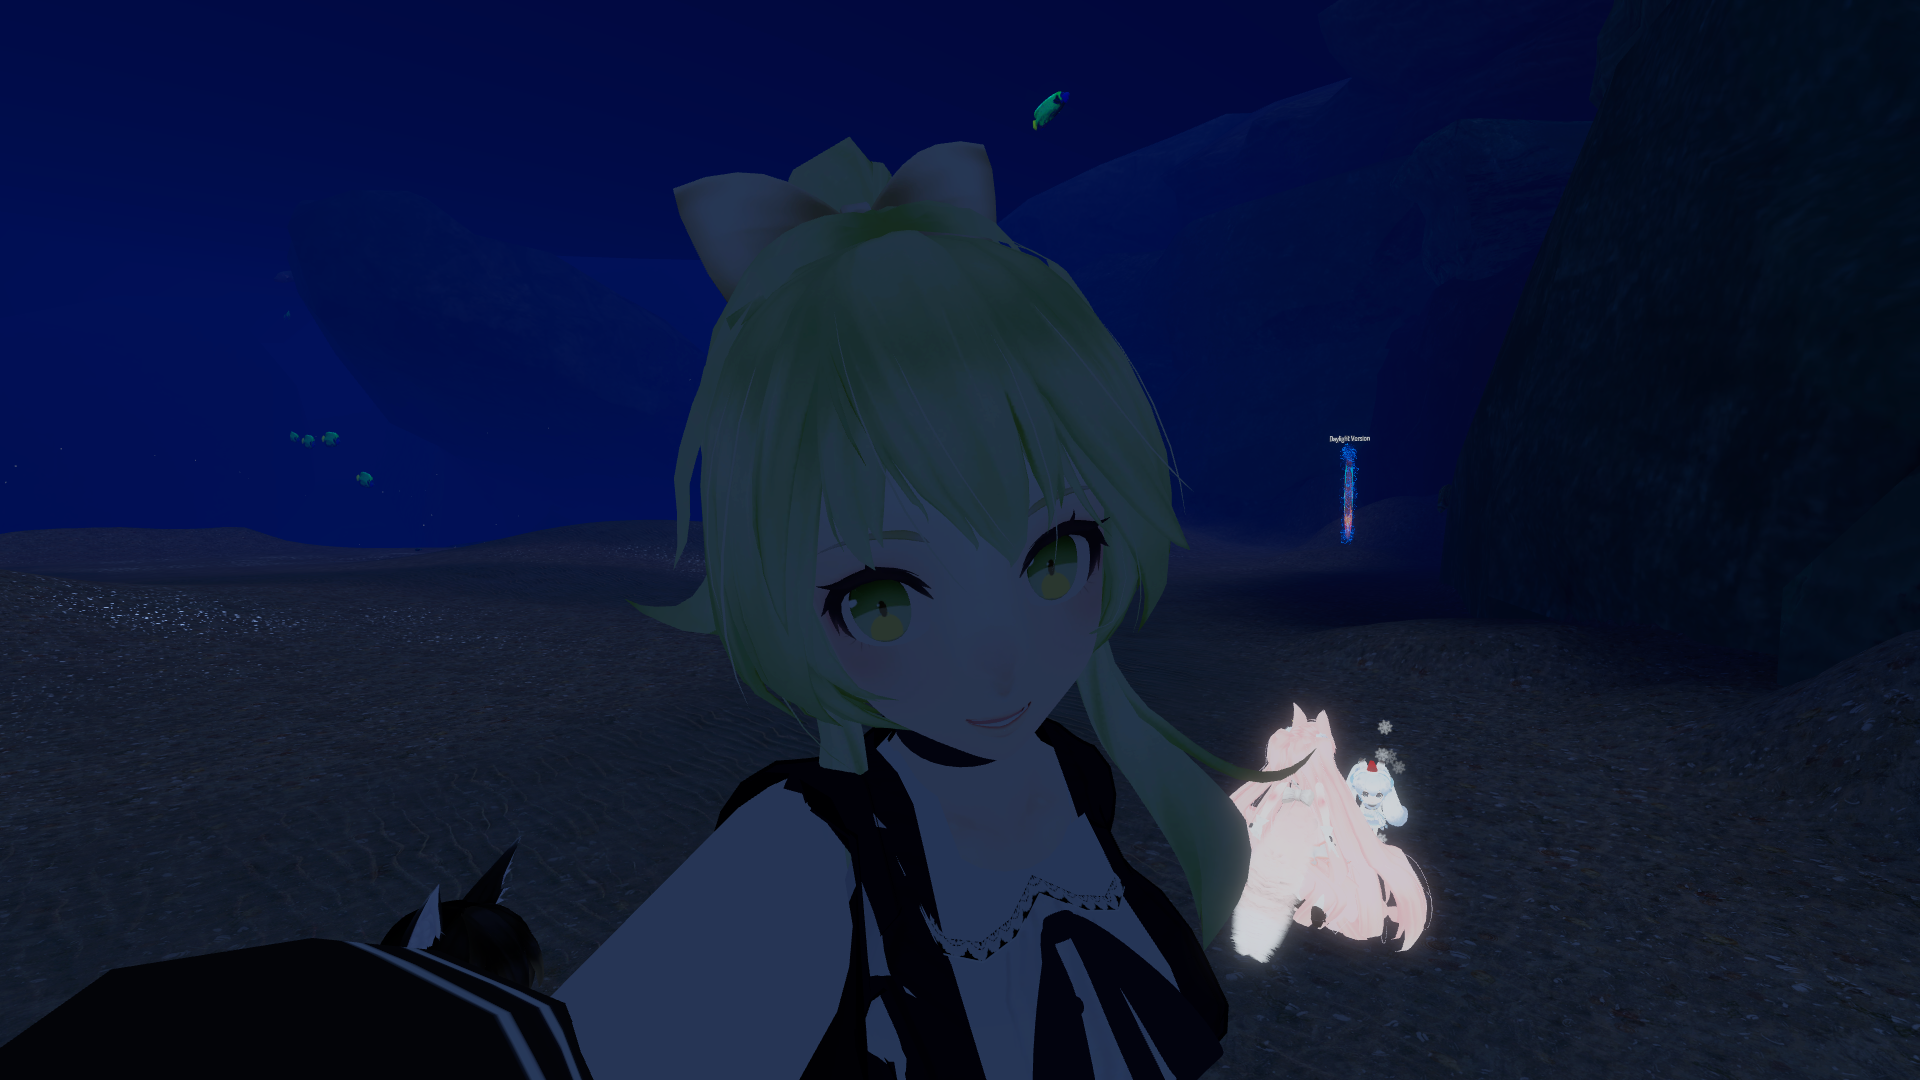 VRChat_1920x1080_2019-01-10_09-39-08.717.png